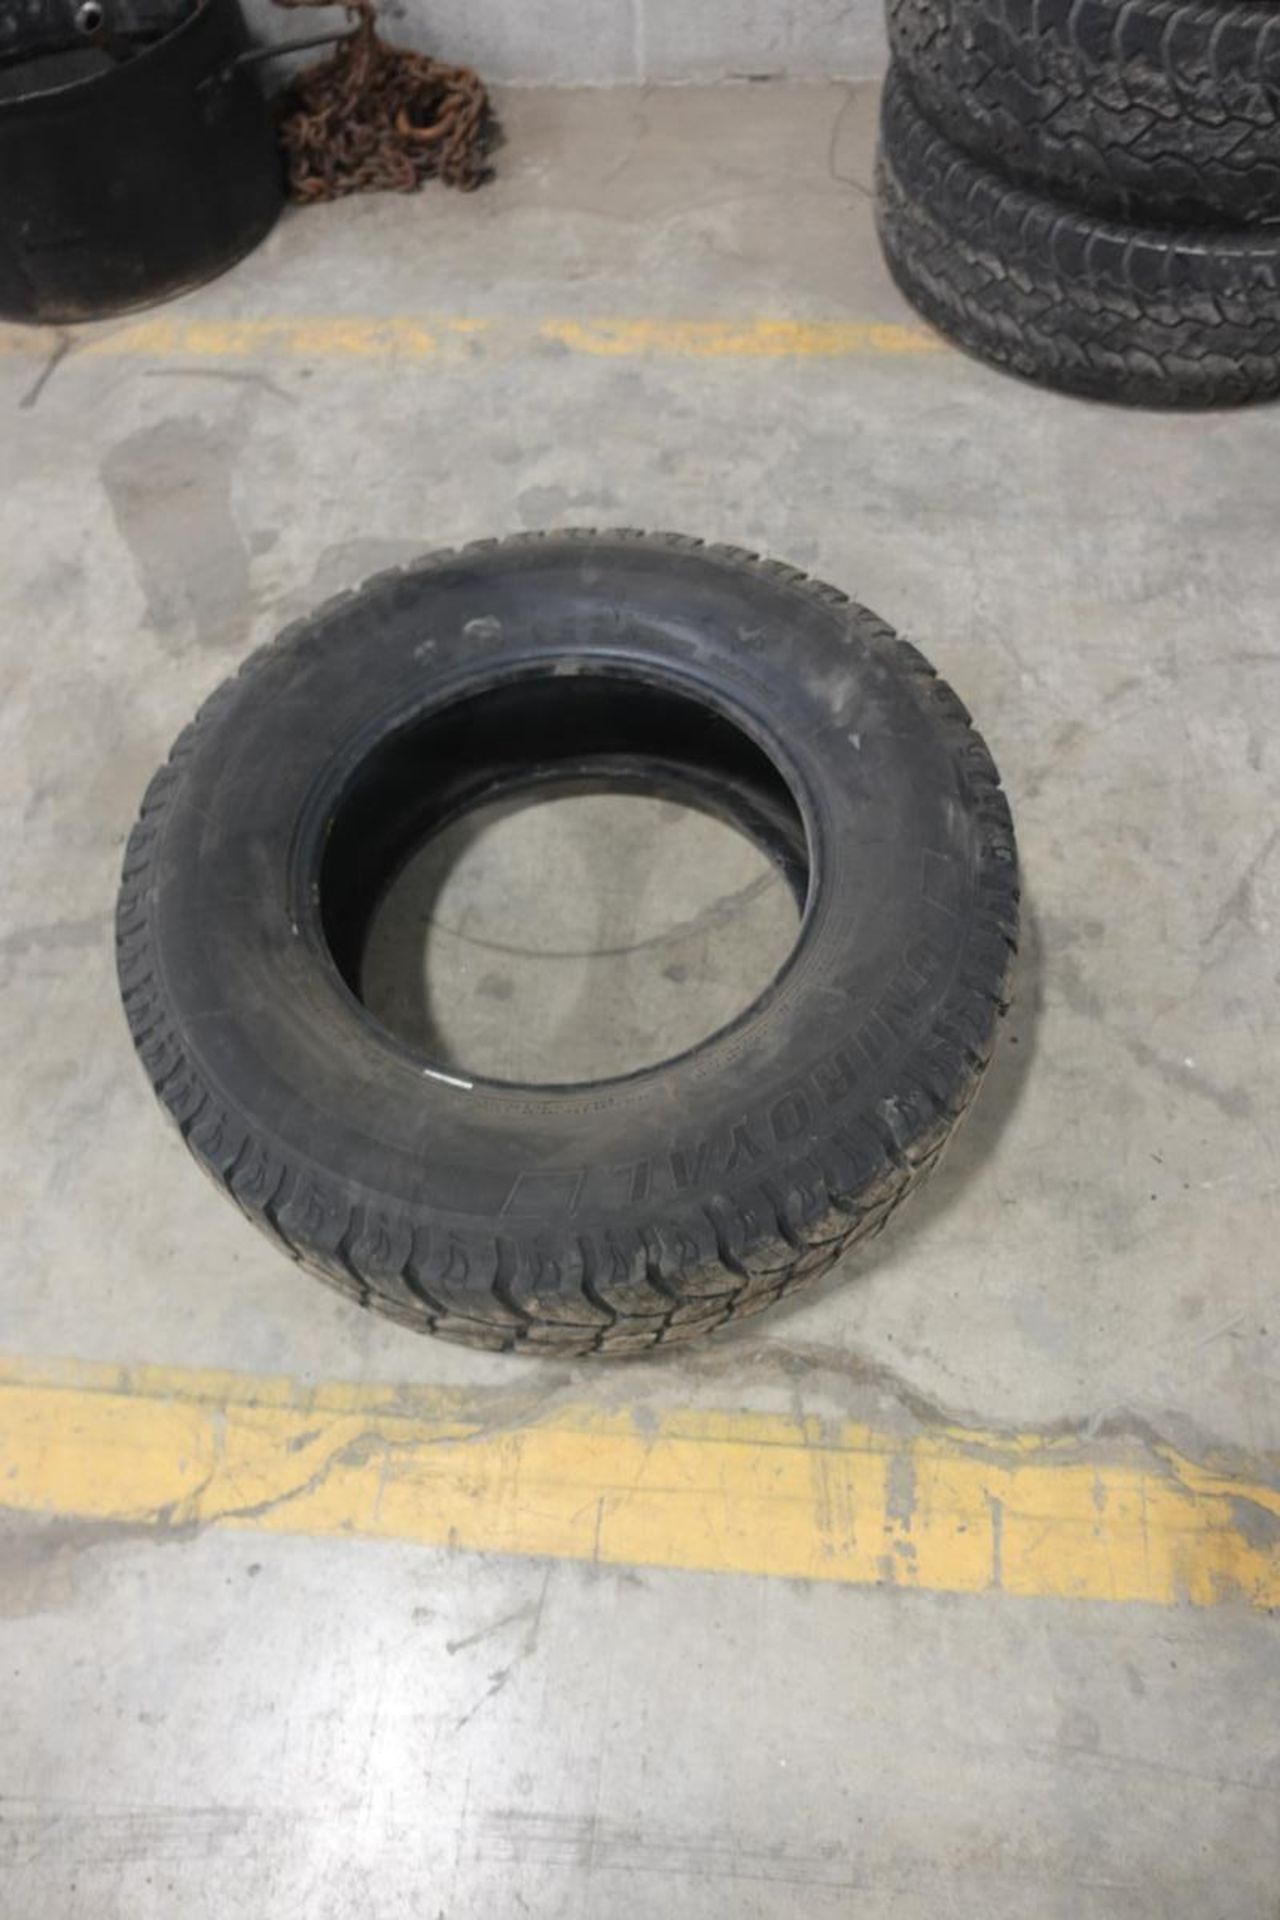 MIRAGE, 265/70R17, ALL TERRAIN TIRE - Image 2 of 15